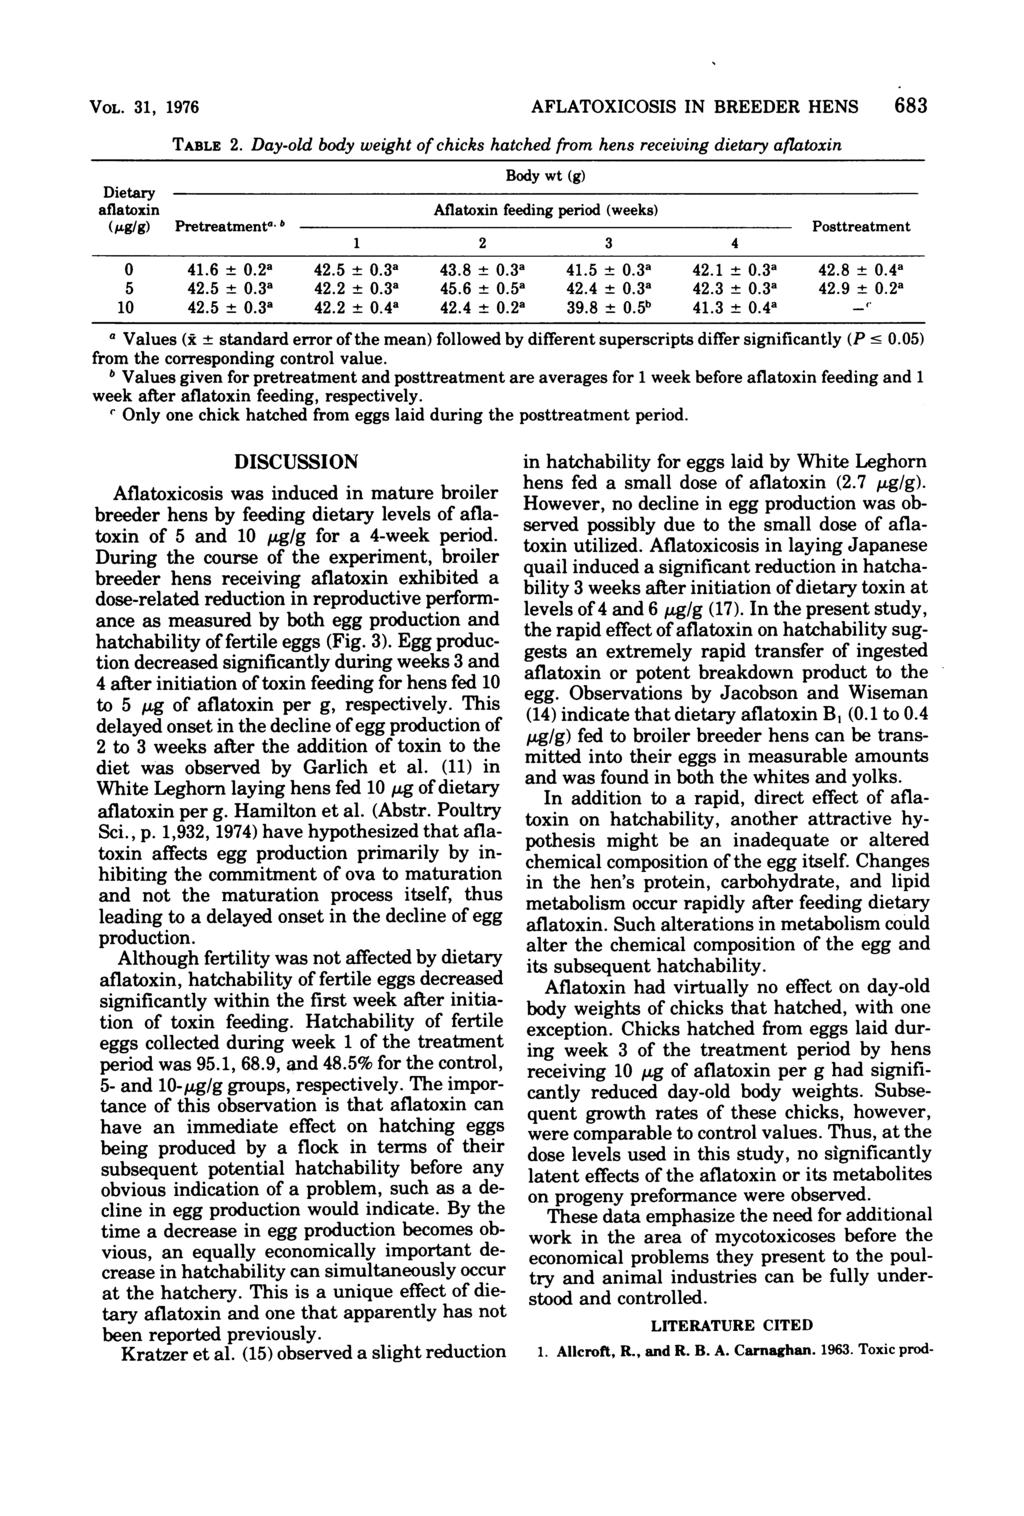 VOL. 31, 1976 Dietary afla AFLATOXICOSIS IN BREEDER HENS 683 TABLE 2.